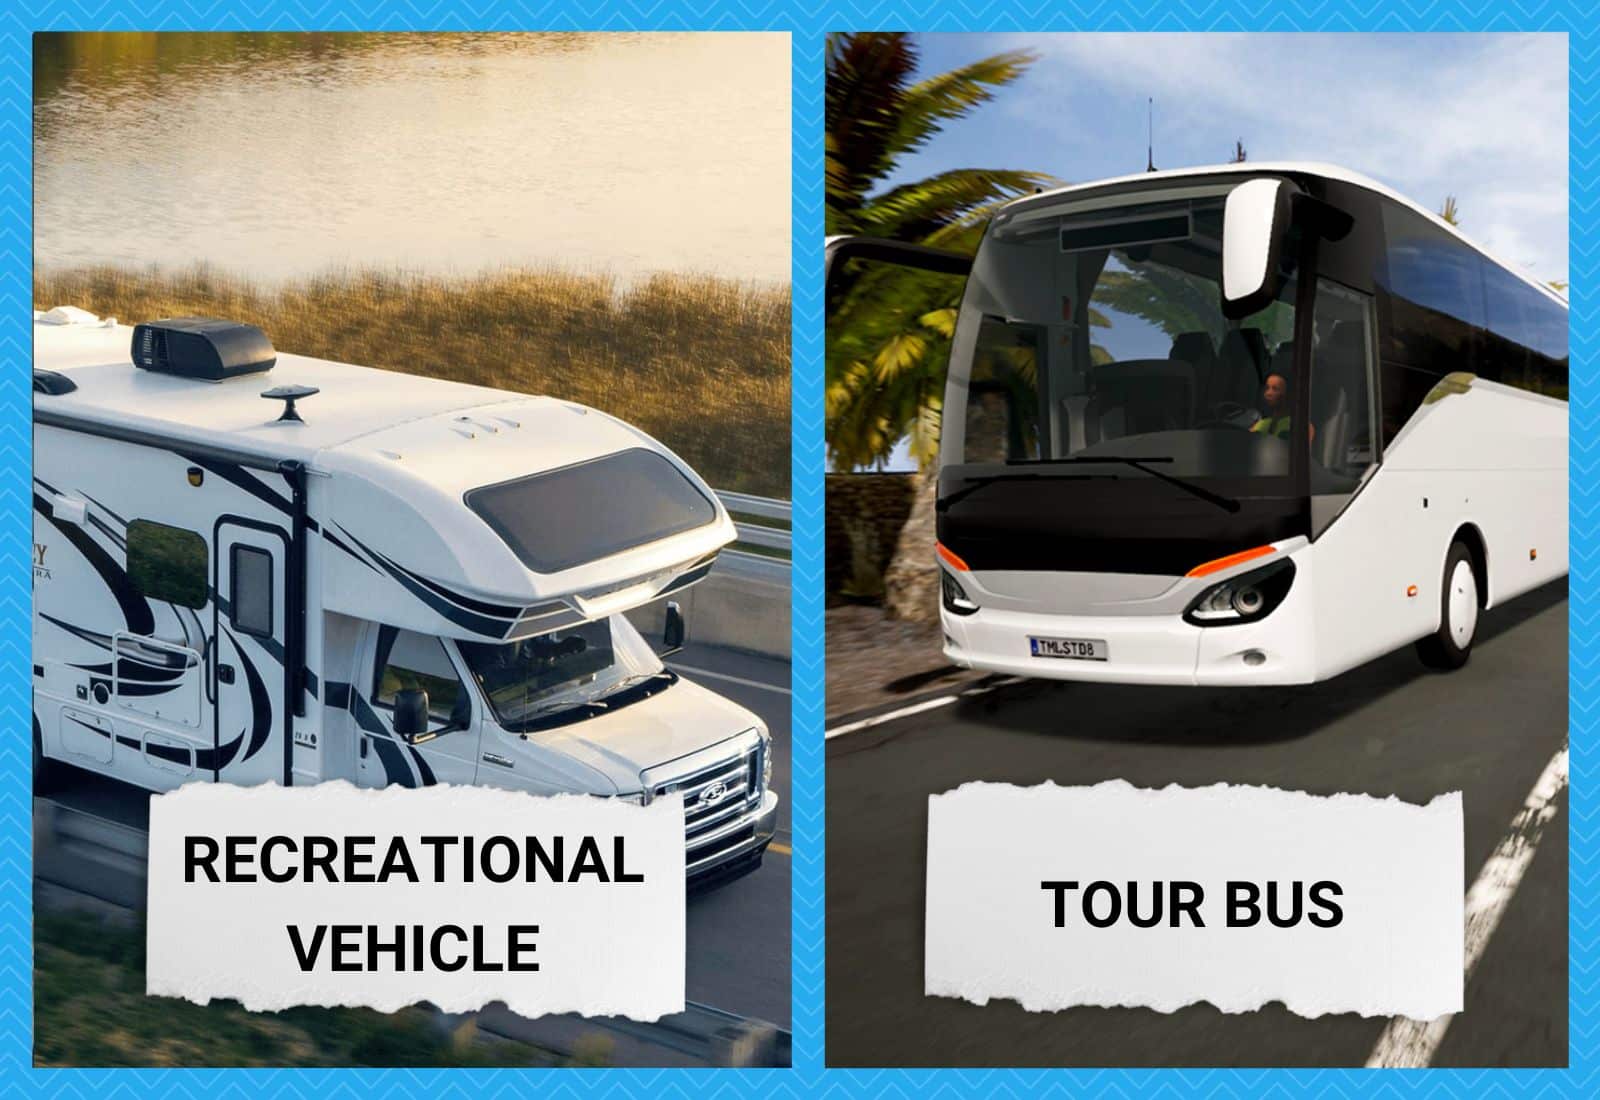 RV vs Tour Bus: Which is Better?